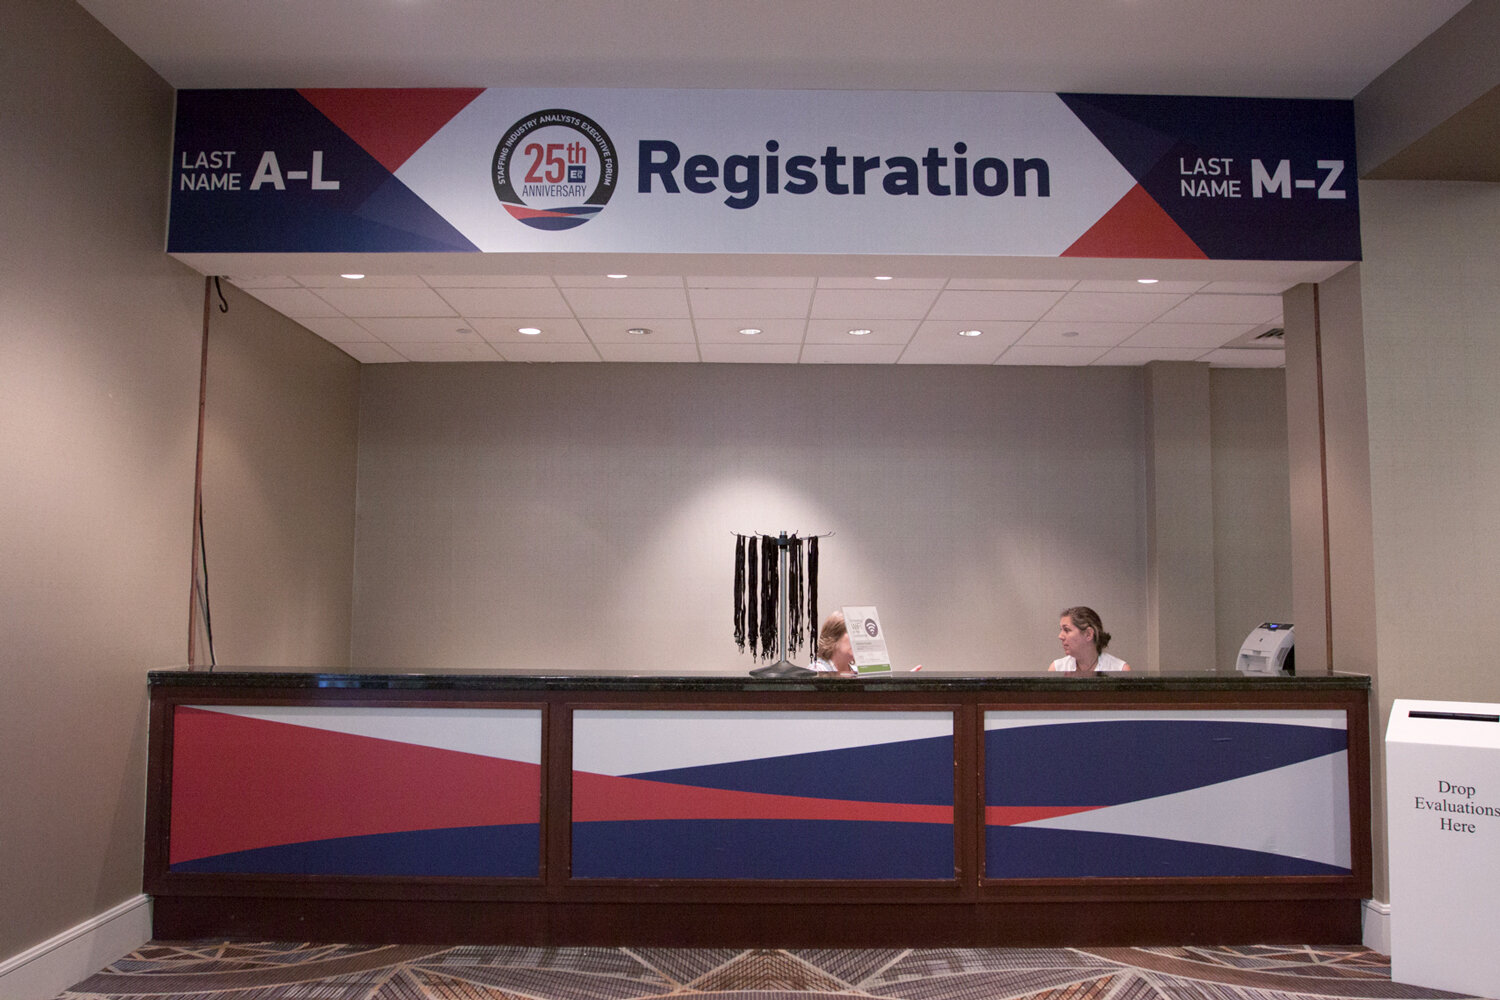   REGISTRATION BOOTH:  Final version applied to built-in registration at Executive Forum 2016 